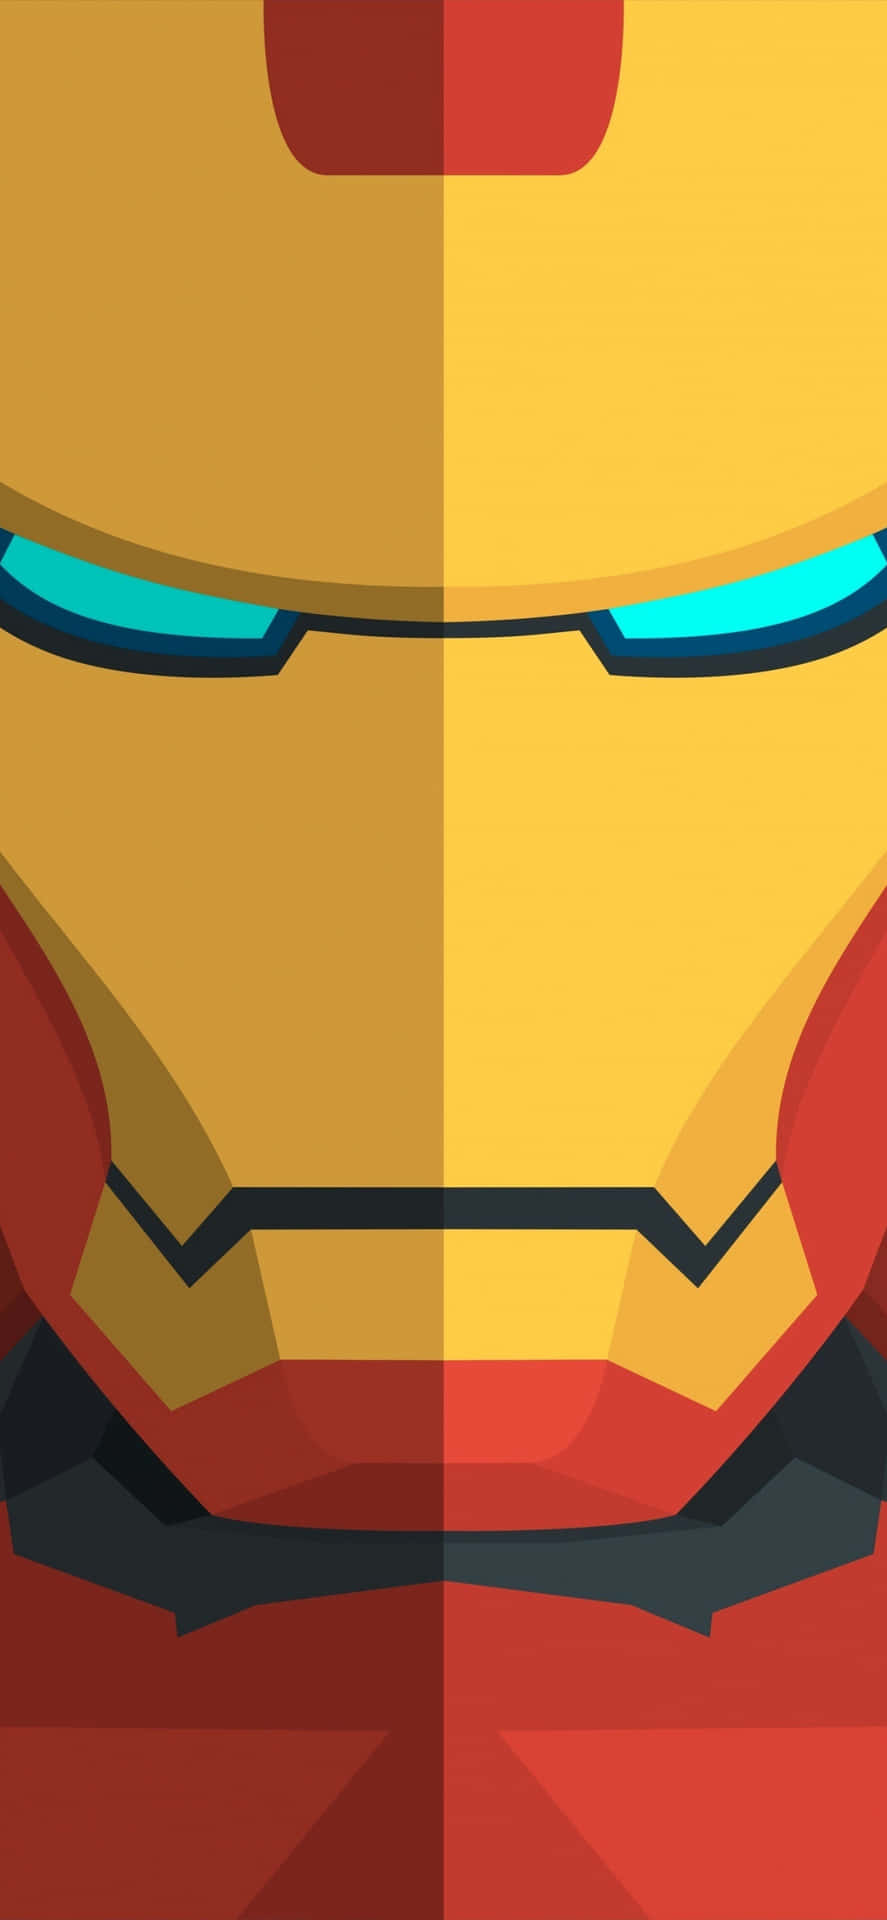 Iron Man Face In A Red And Yellow Color Wallpaper